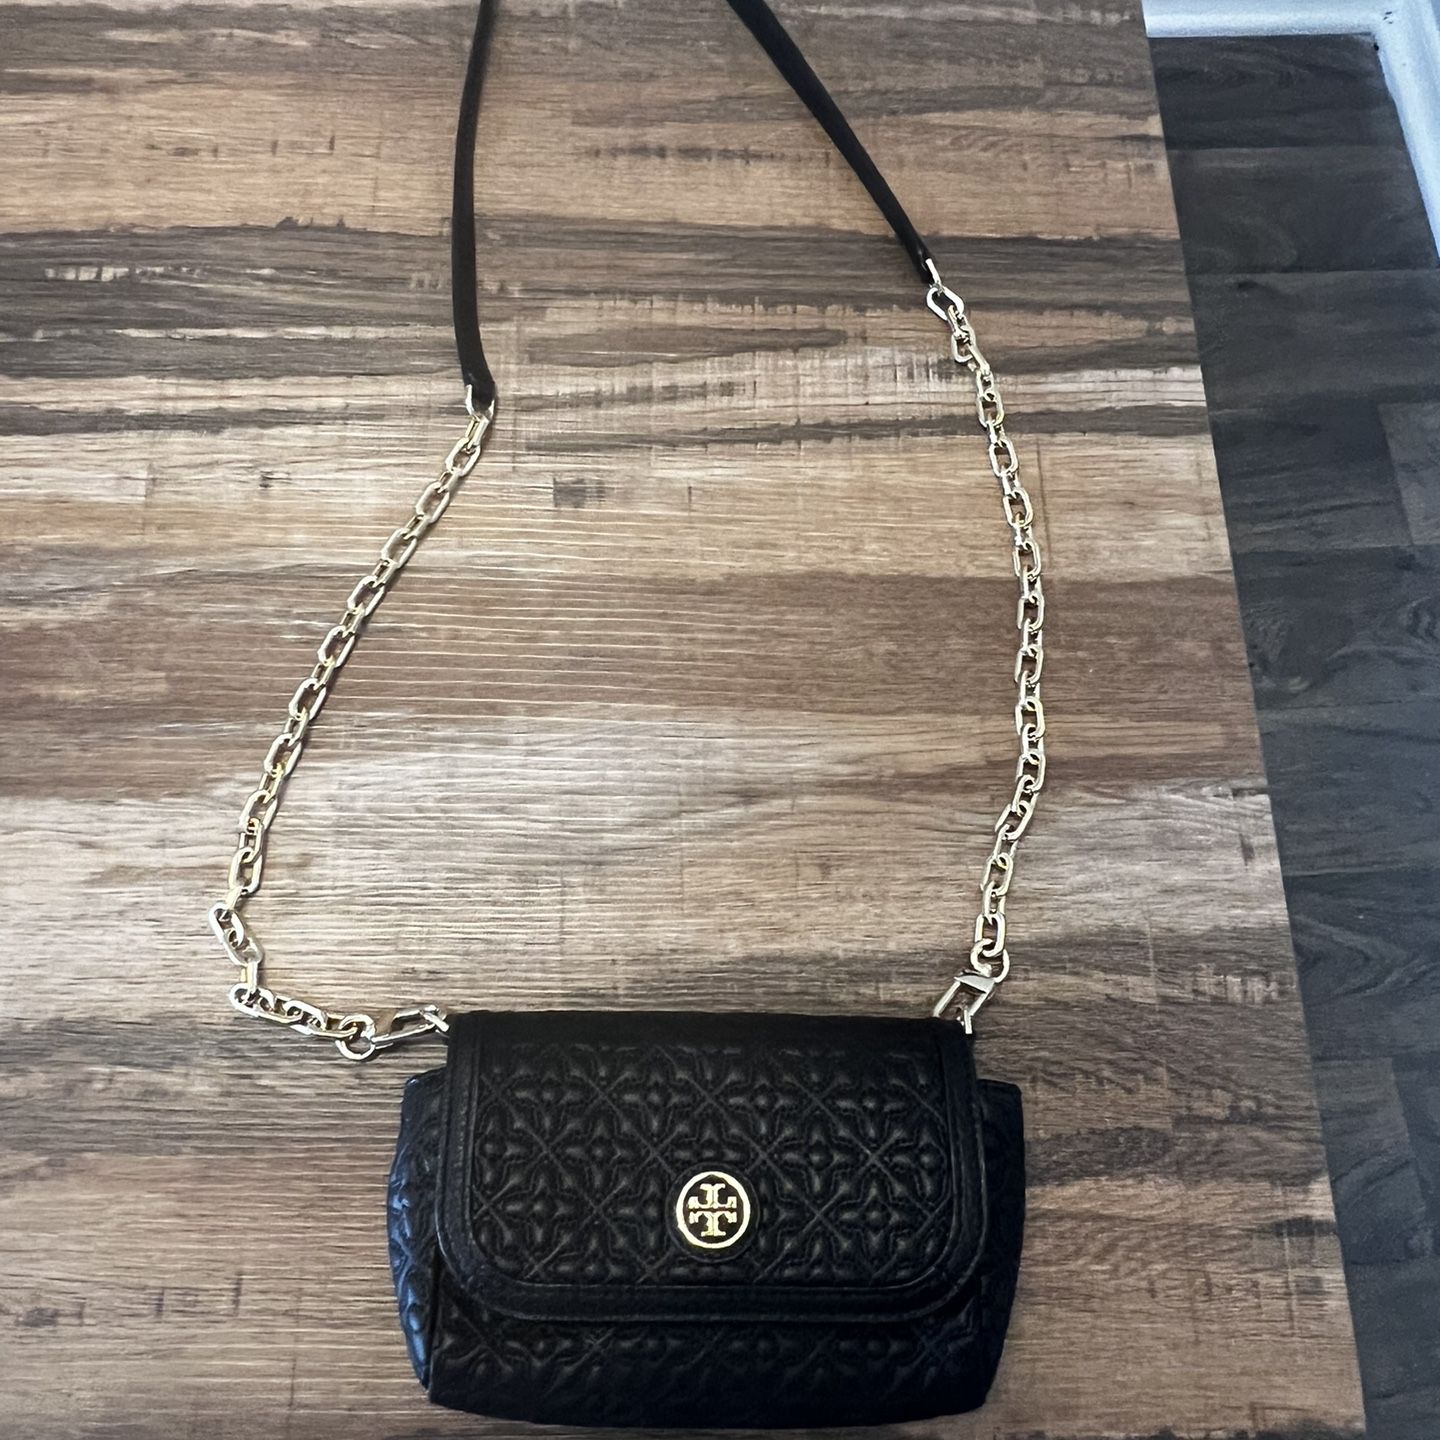 Authentic Black Tory Burch Crossbody Purse Bag for Sale in Charlotte, NC -  OfferUp